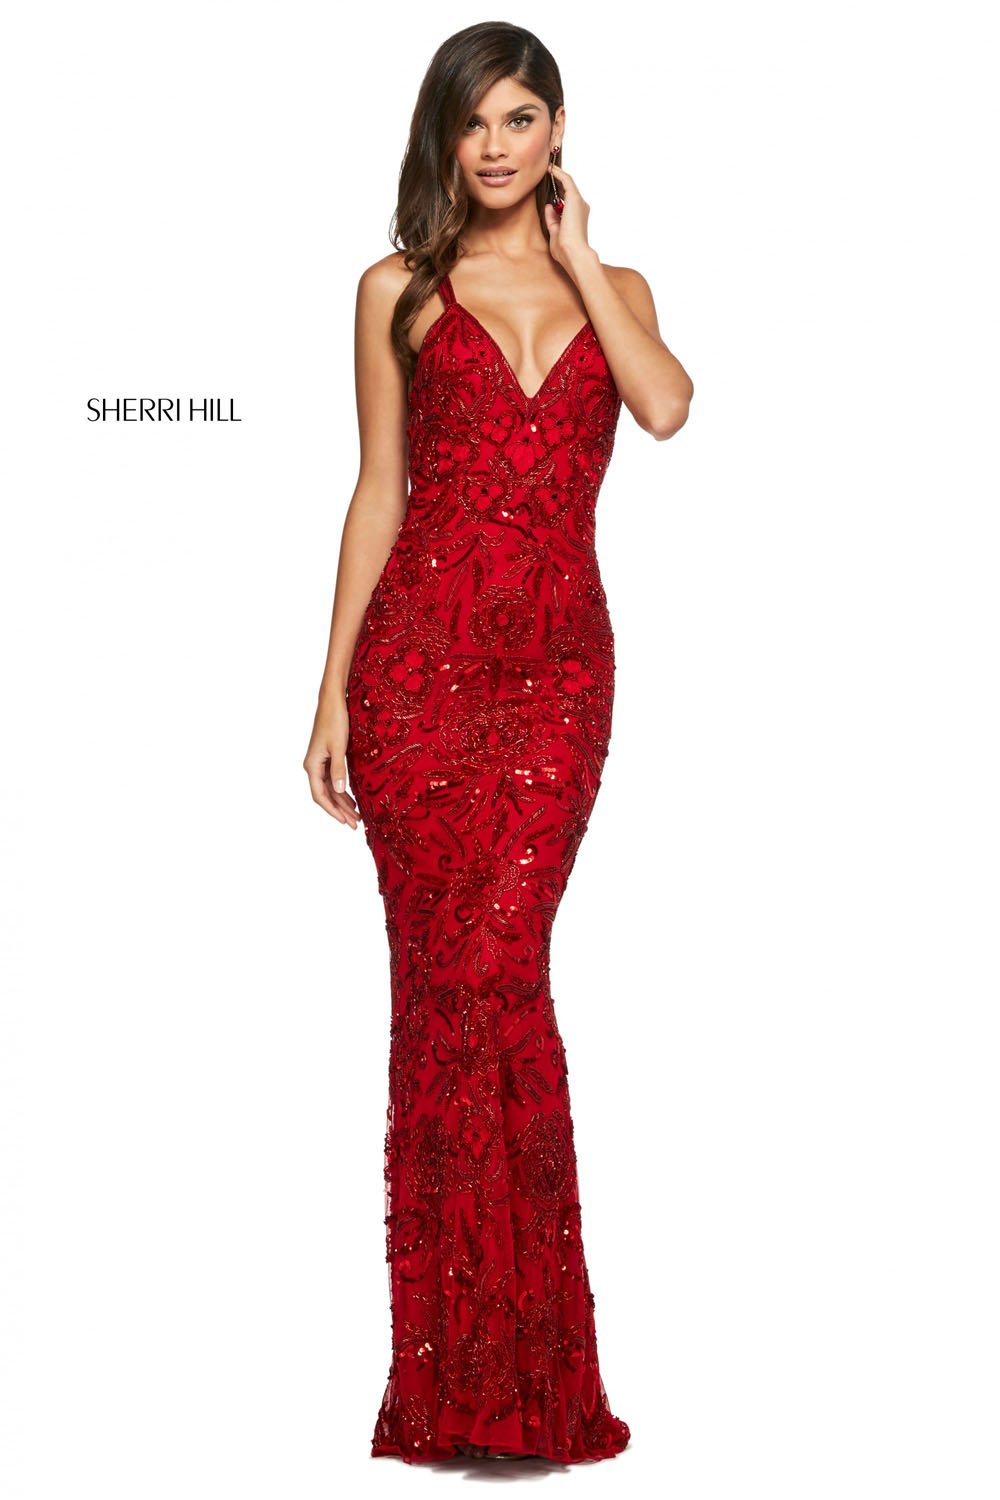 Sherri Hill 53689 dress images in these colors: Red, Black.